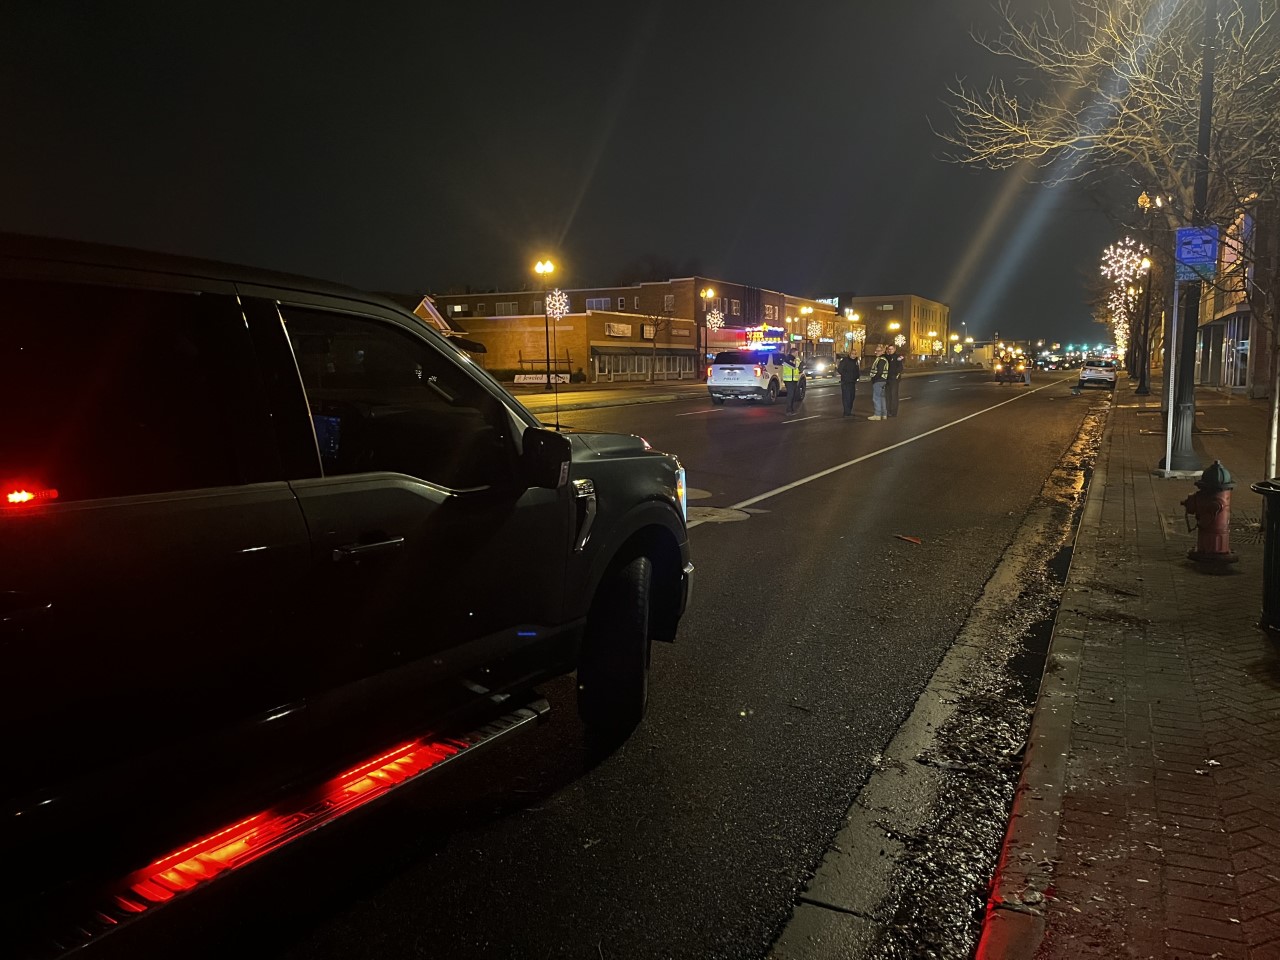 A man was hit by a car in Murray on Dec. 28 2022. (KSL NewsRadio)...